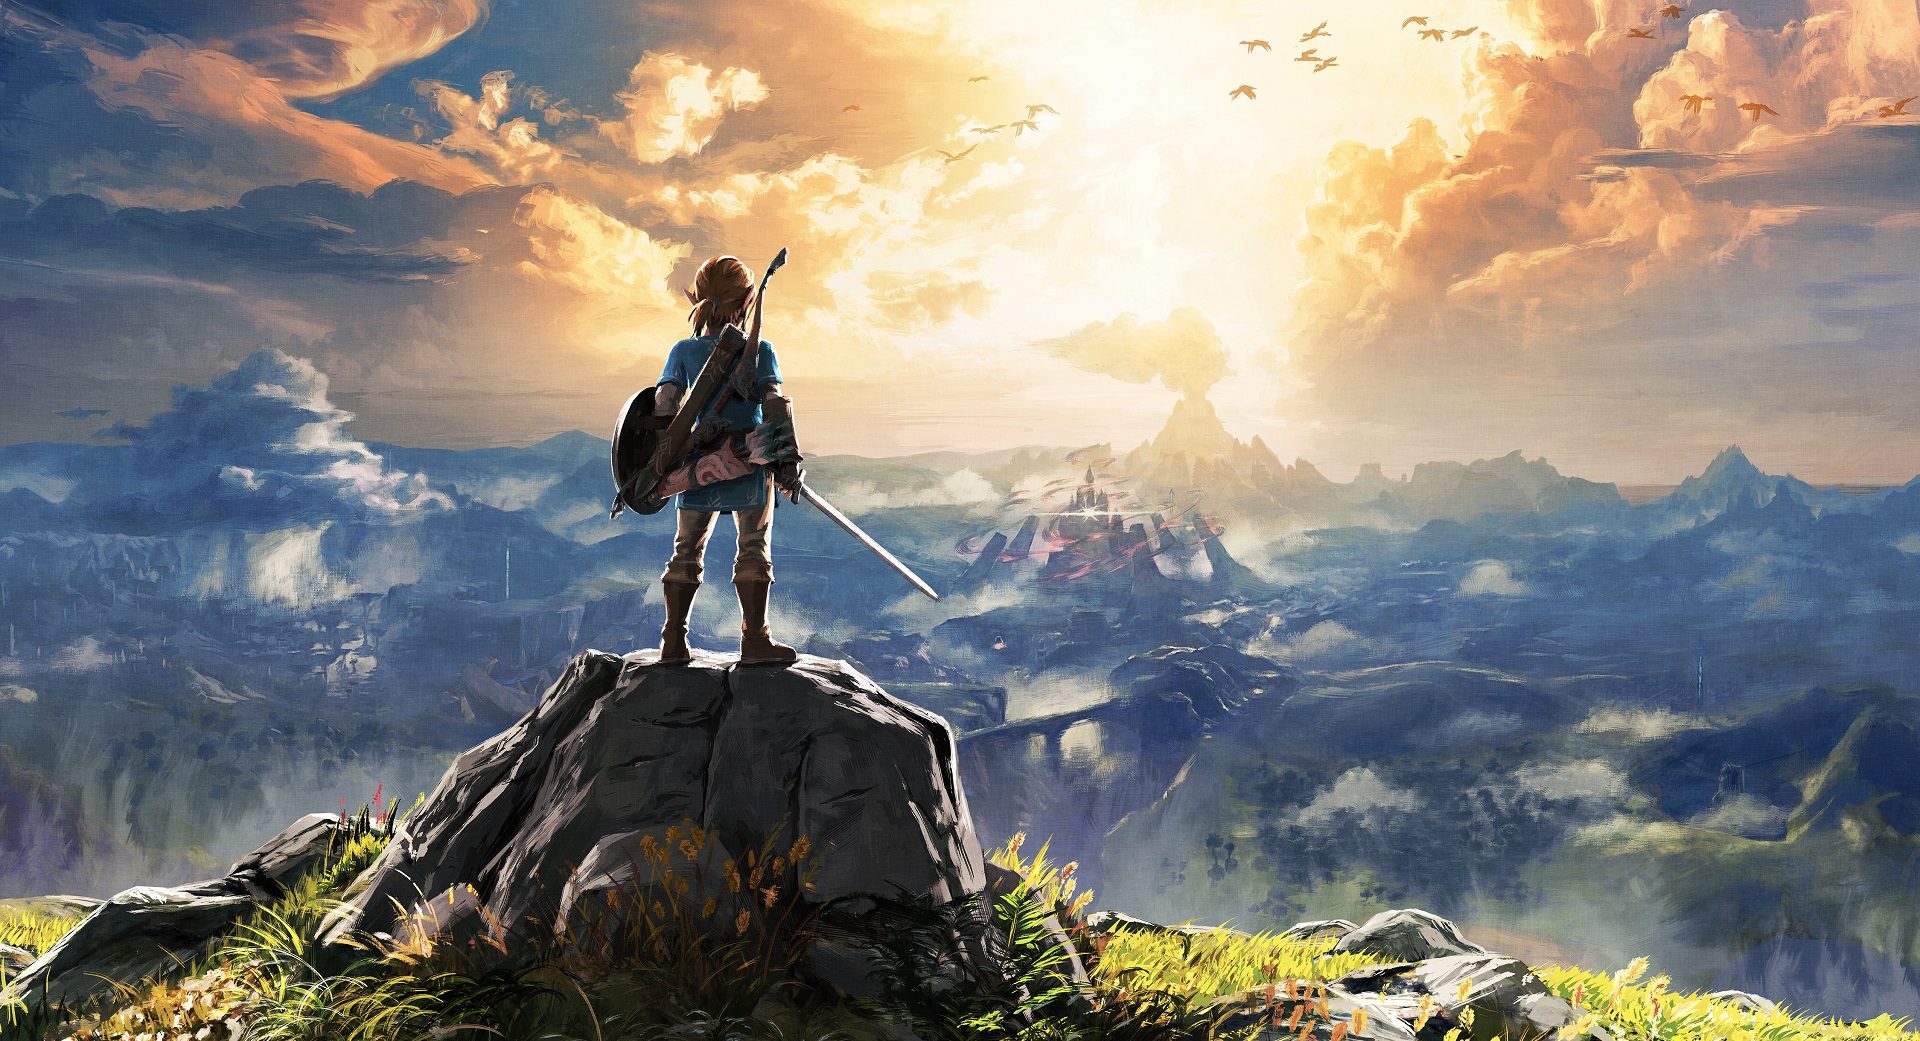 Amazing The Legend Of Zelda: Breath Of The Wild Pictures & Backgrounds